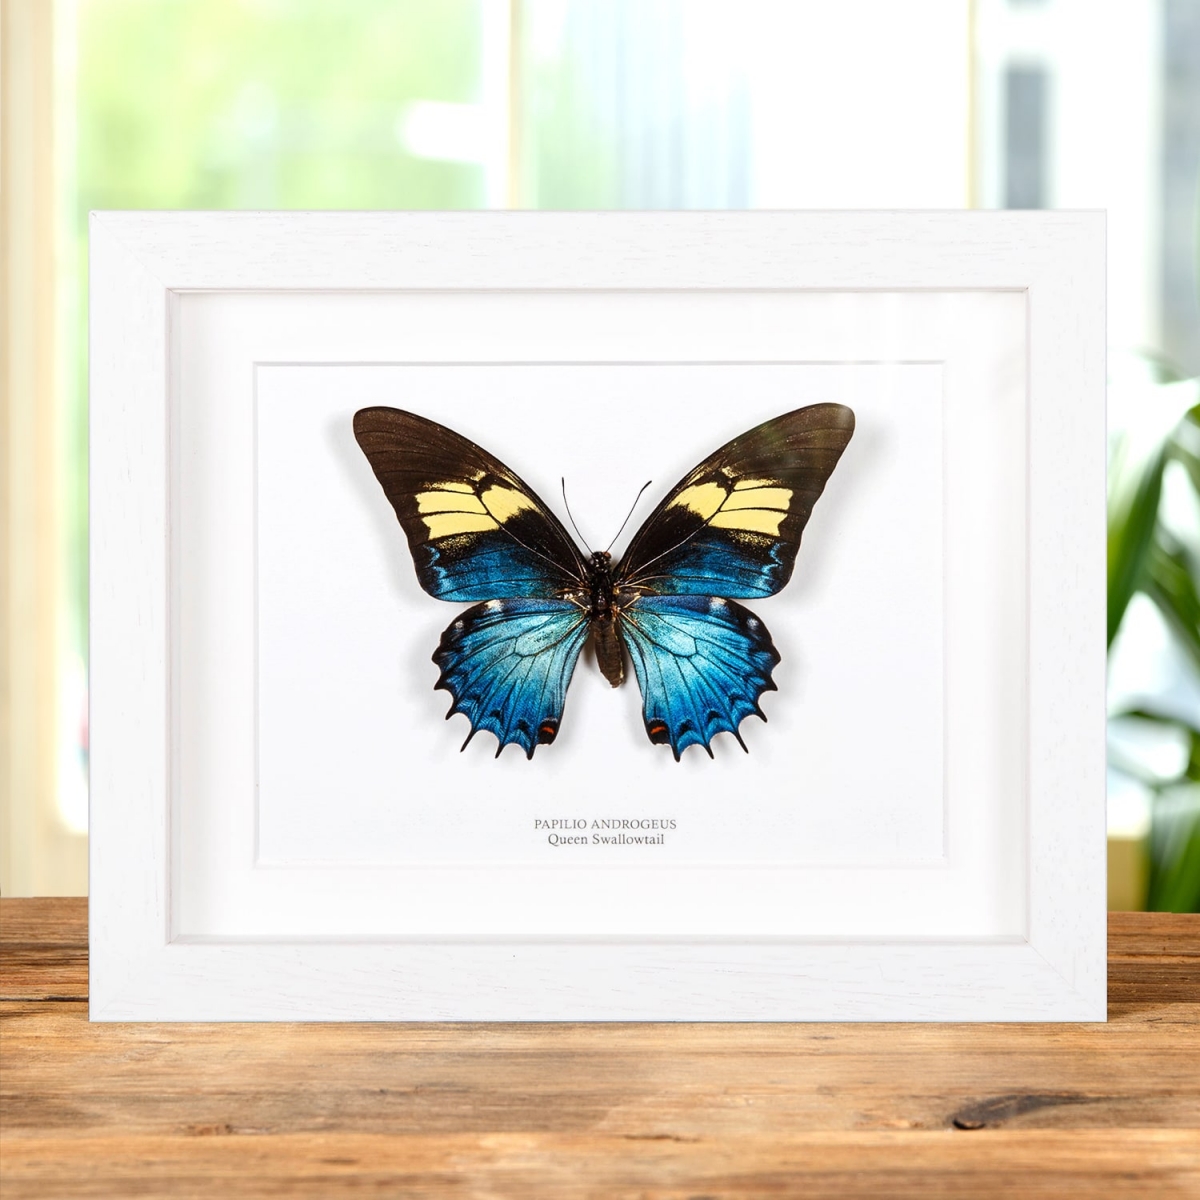 Female Queen Swallowtail In Box Frame (Papilio androgeus)